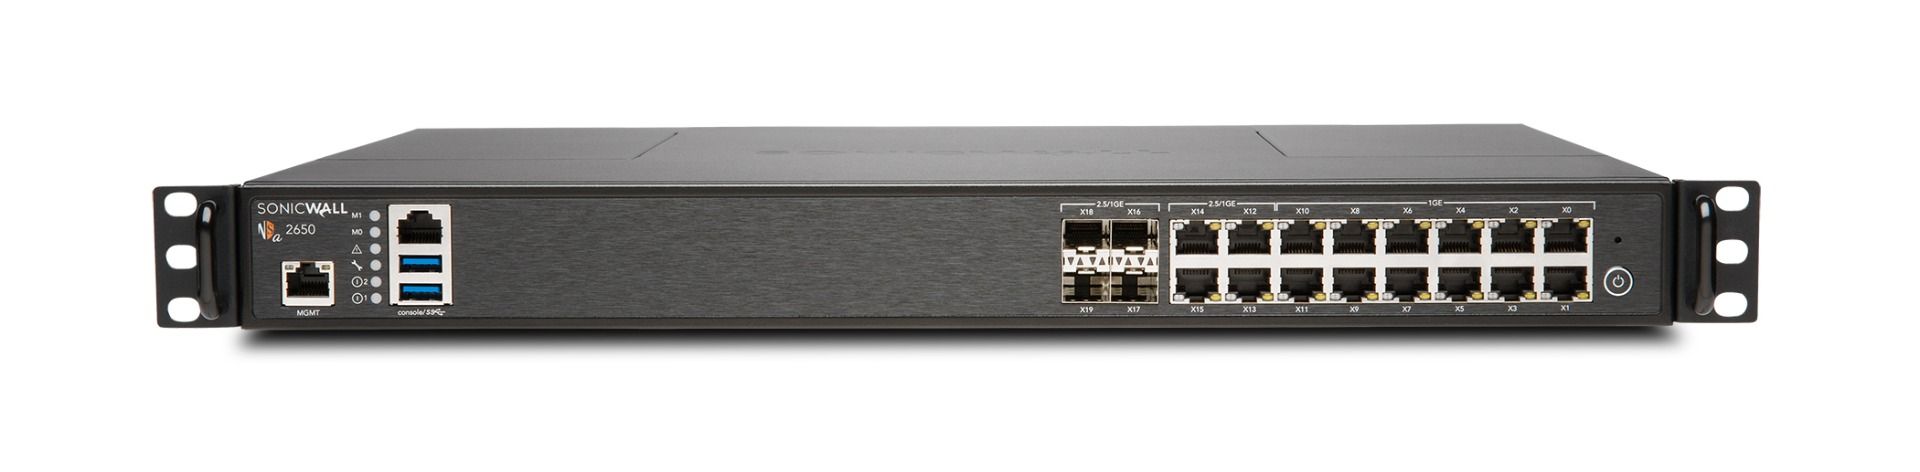 SonicWall 02-SSC-7370 | NSA 2700 Firewall Secure Upgrade Plus